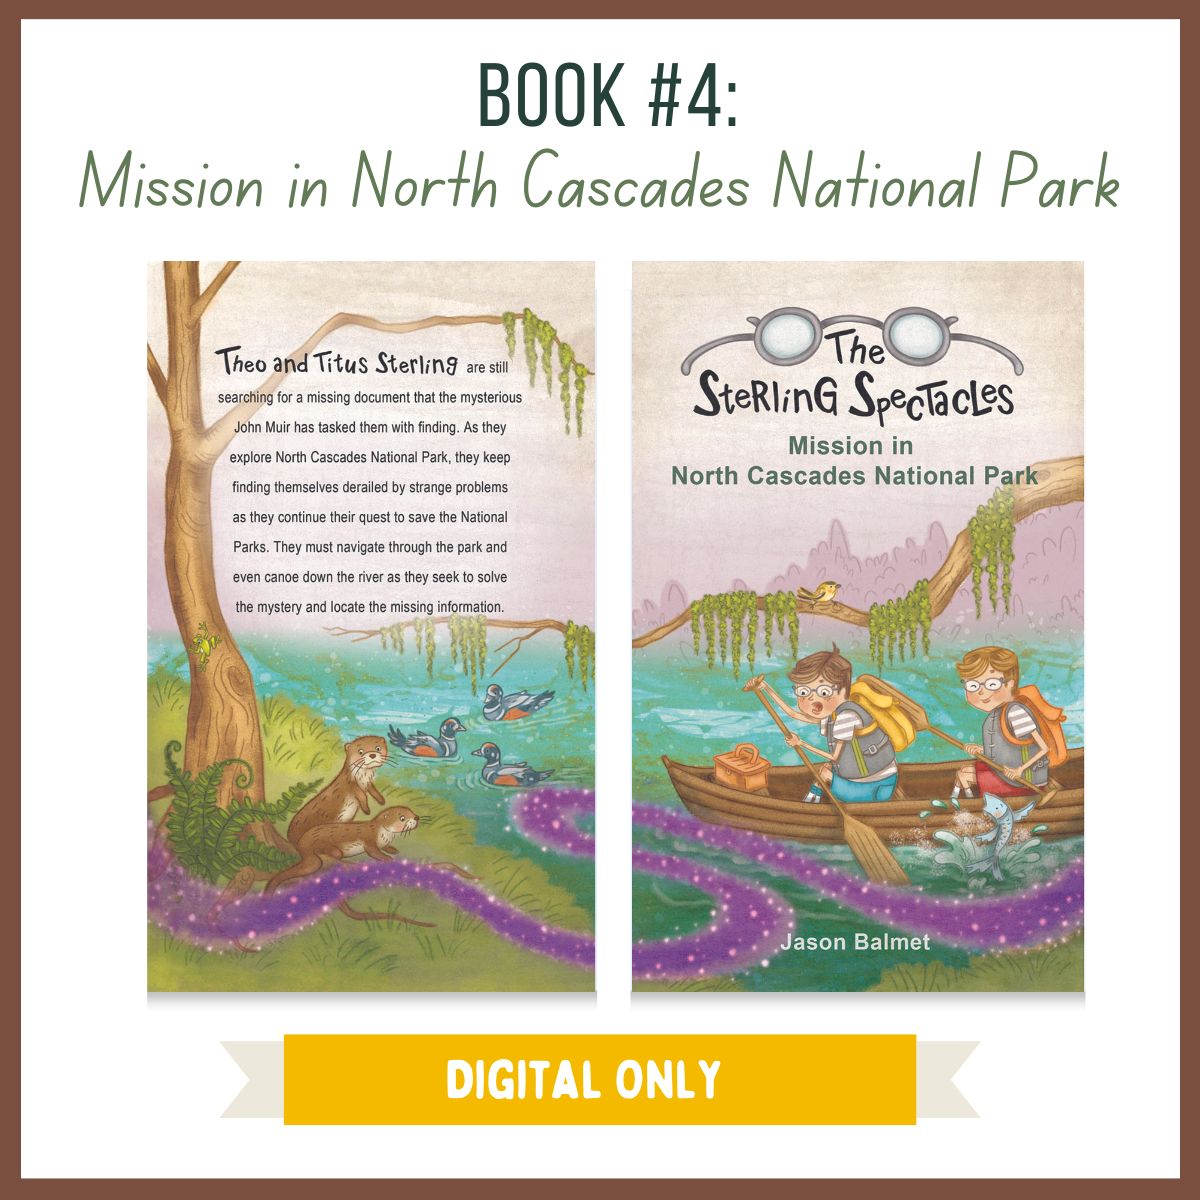 Book #4: Mission in North Cascades National Park - DIGITAL